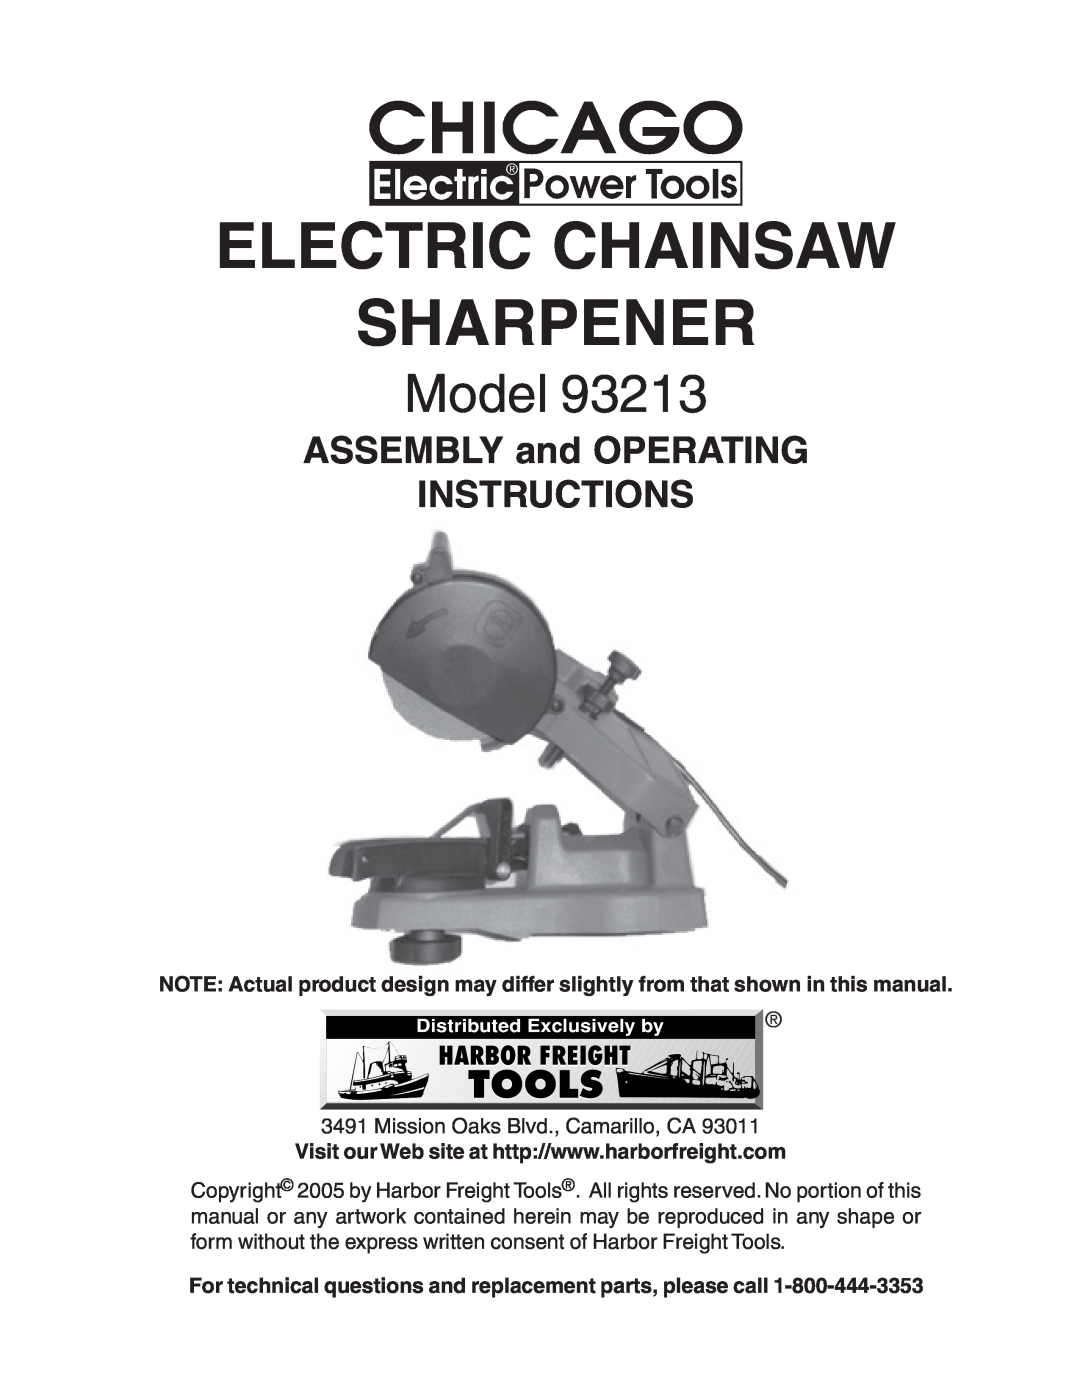 Harbor Freight Tools 93213 manual Electric Chainsaw Sharpener, Model, ASSEMBLY and OPERATING INSTRUCTIONS 